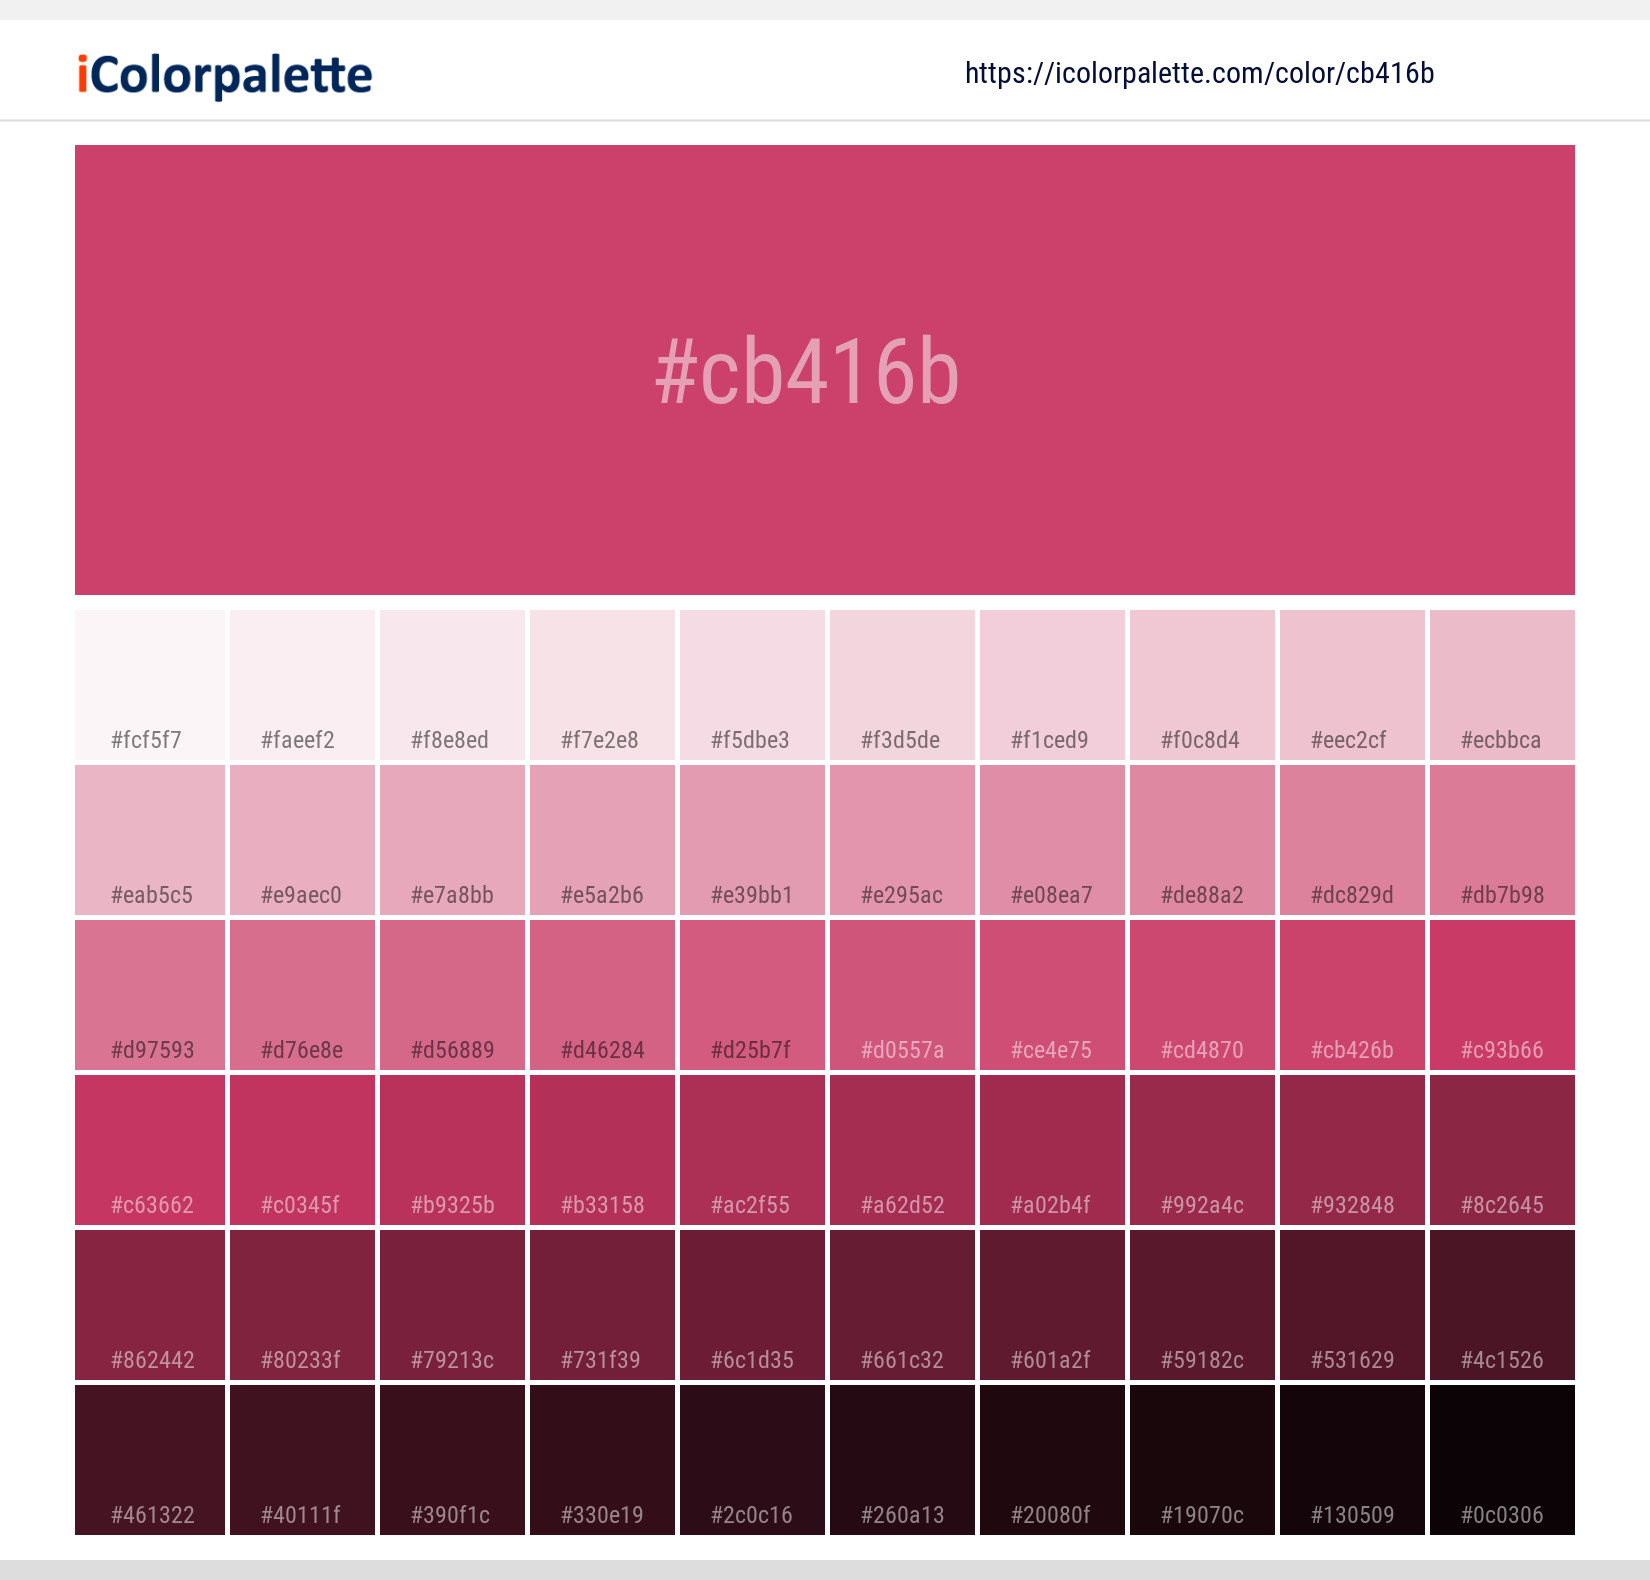 https://www.icolorpalette.com/download/shades/cb416b_color_shades.jpg